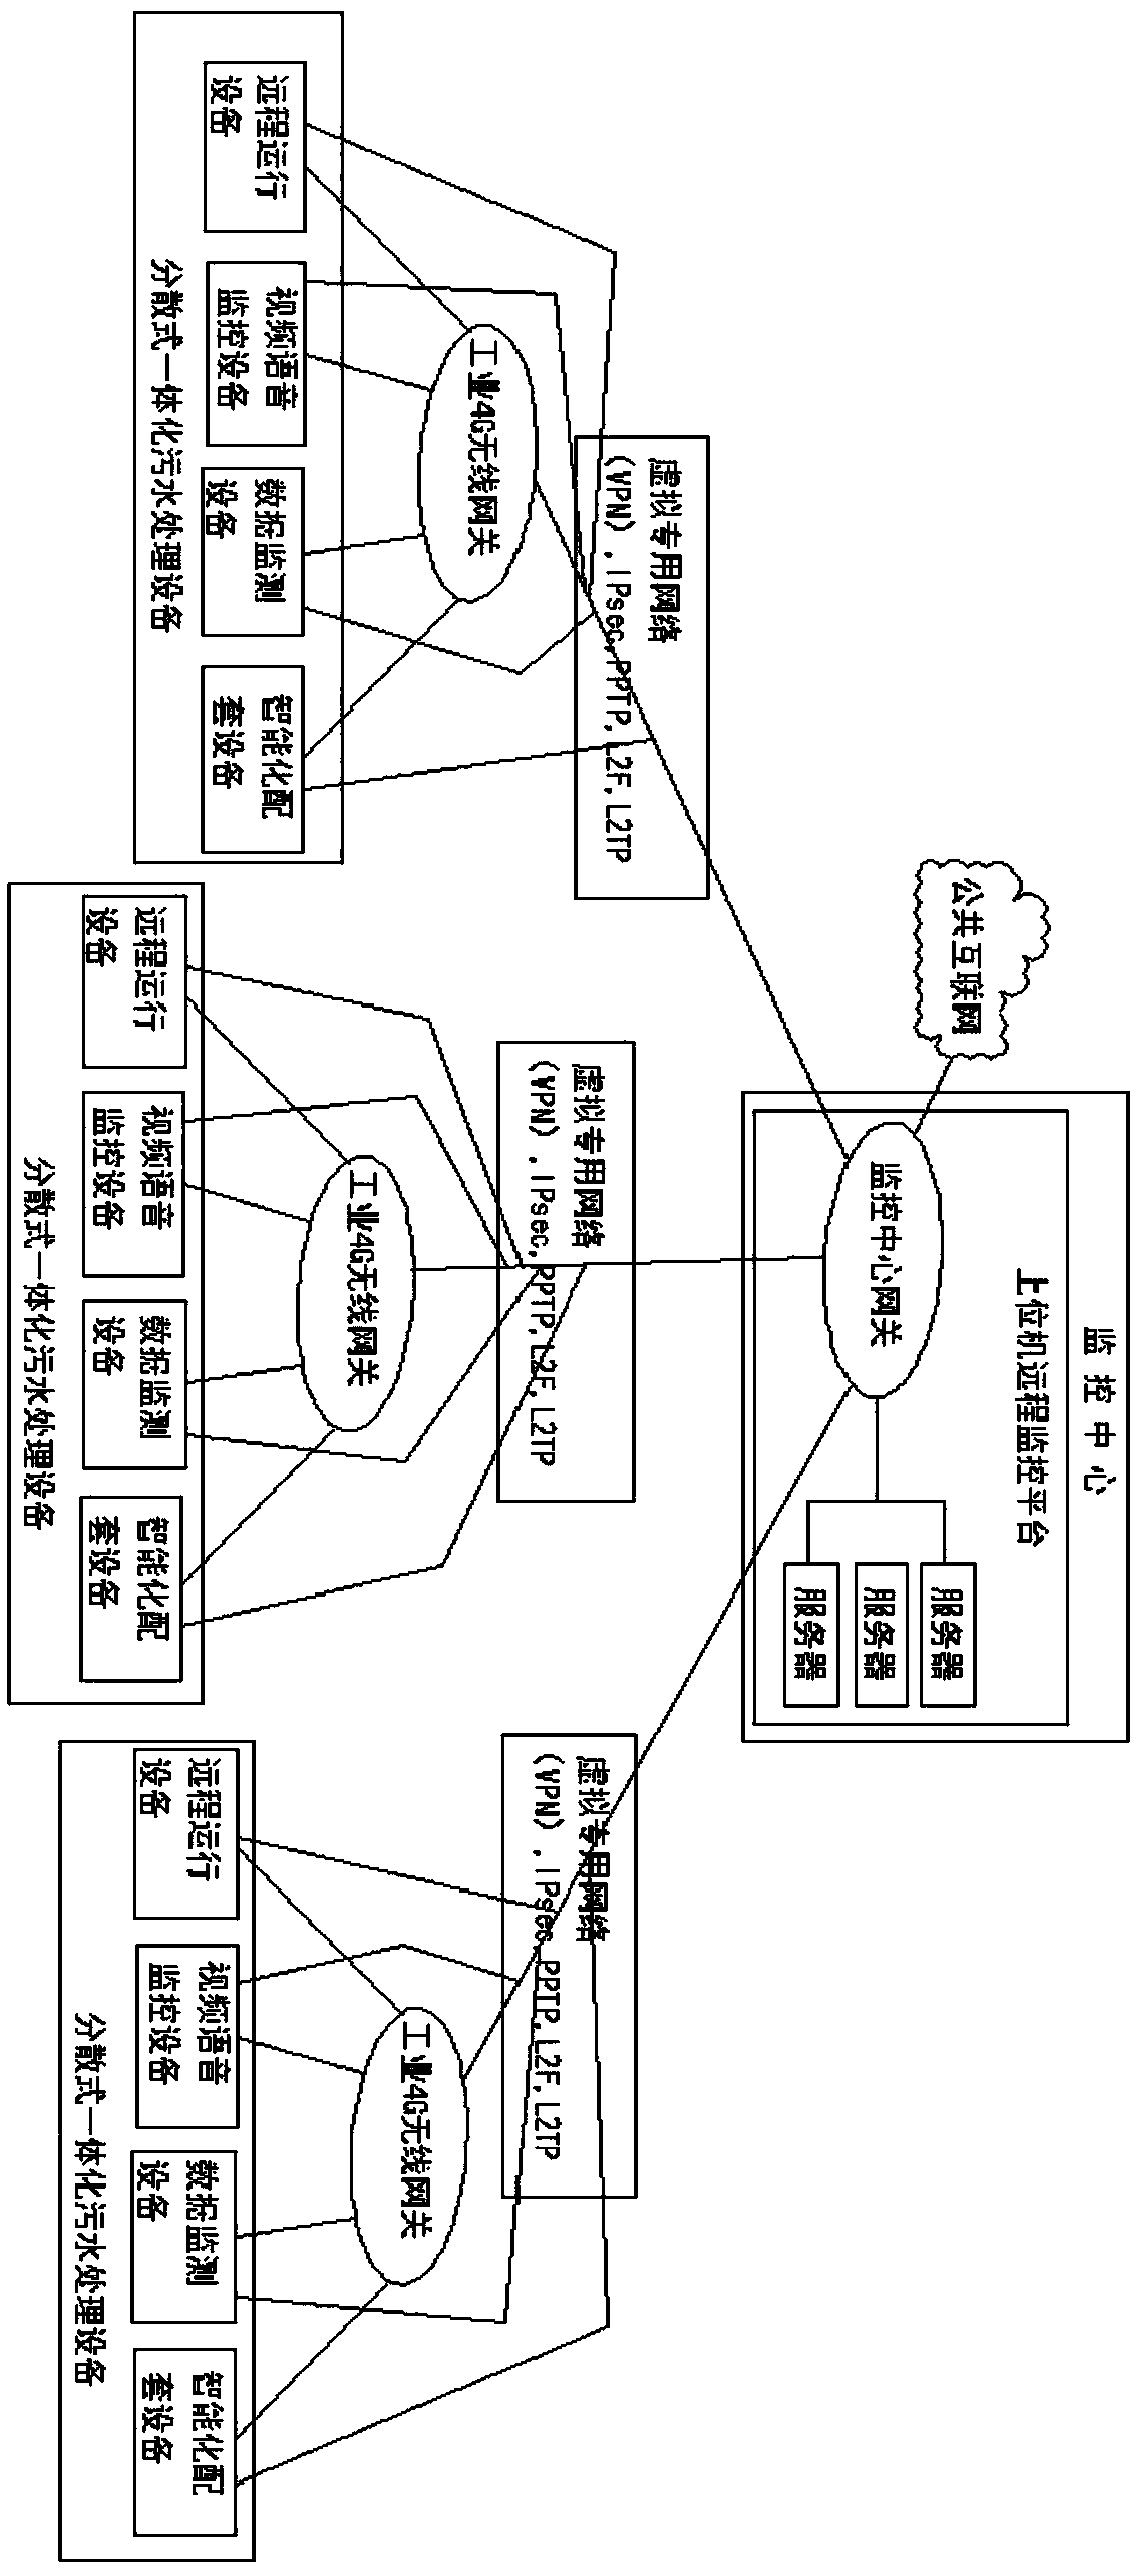 Monitoring system for distributed integrated rural sewage treatment equipment